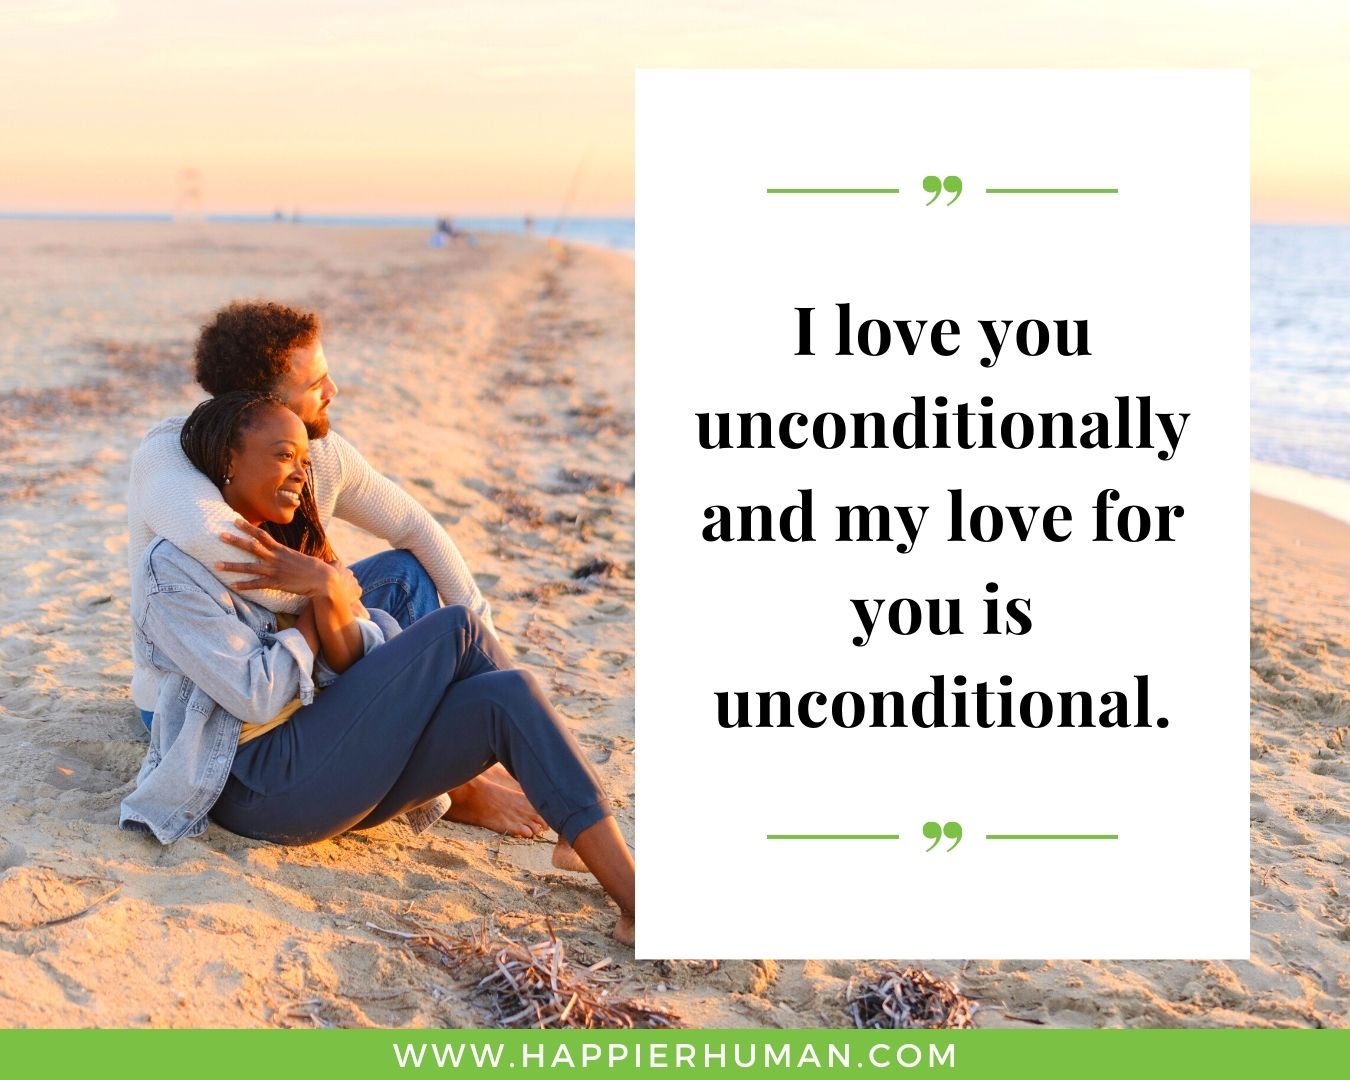 Unconditional Love Quotes for Her - “I love you unconditionally and my love for you is unconditional.”